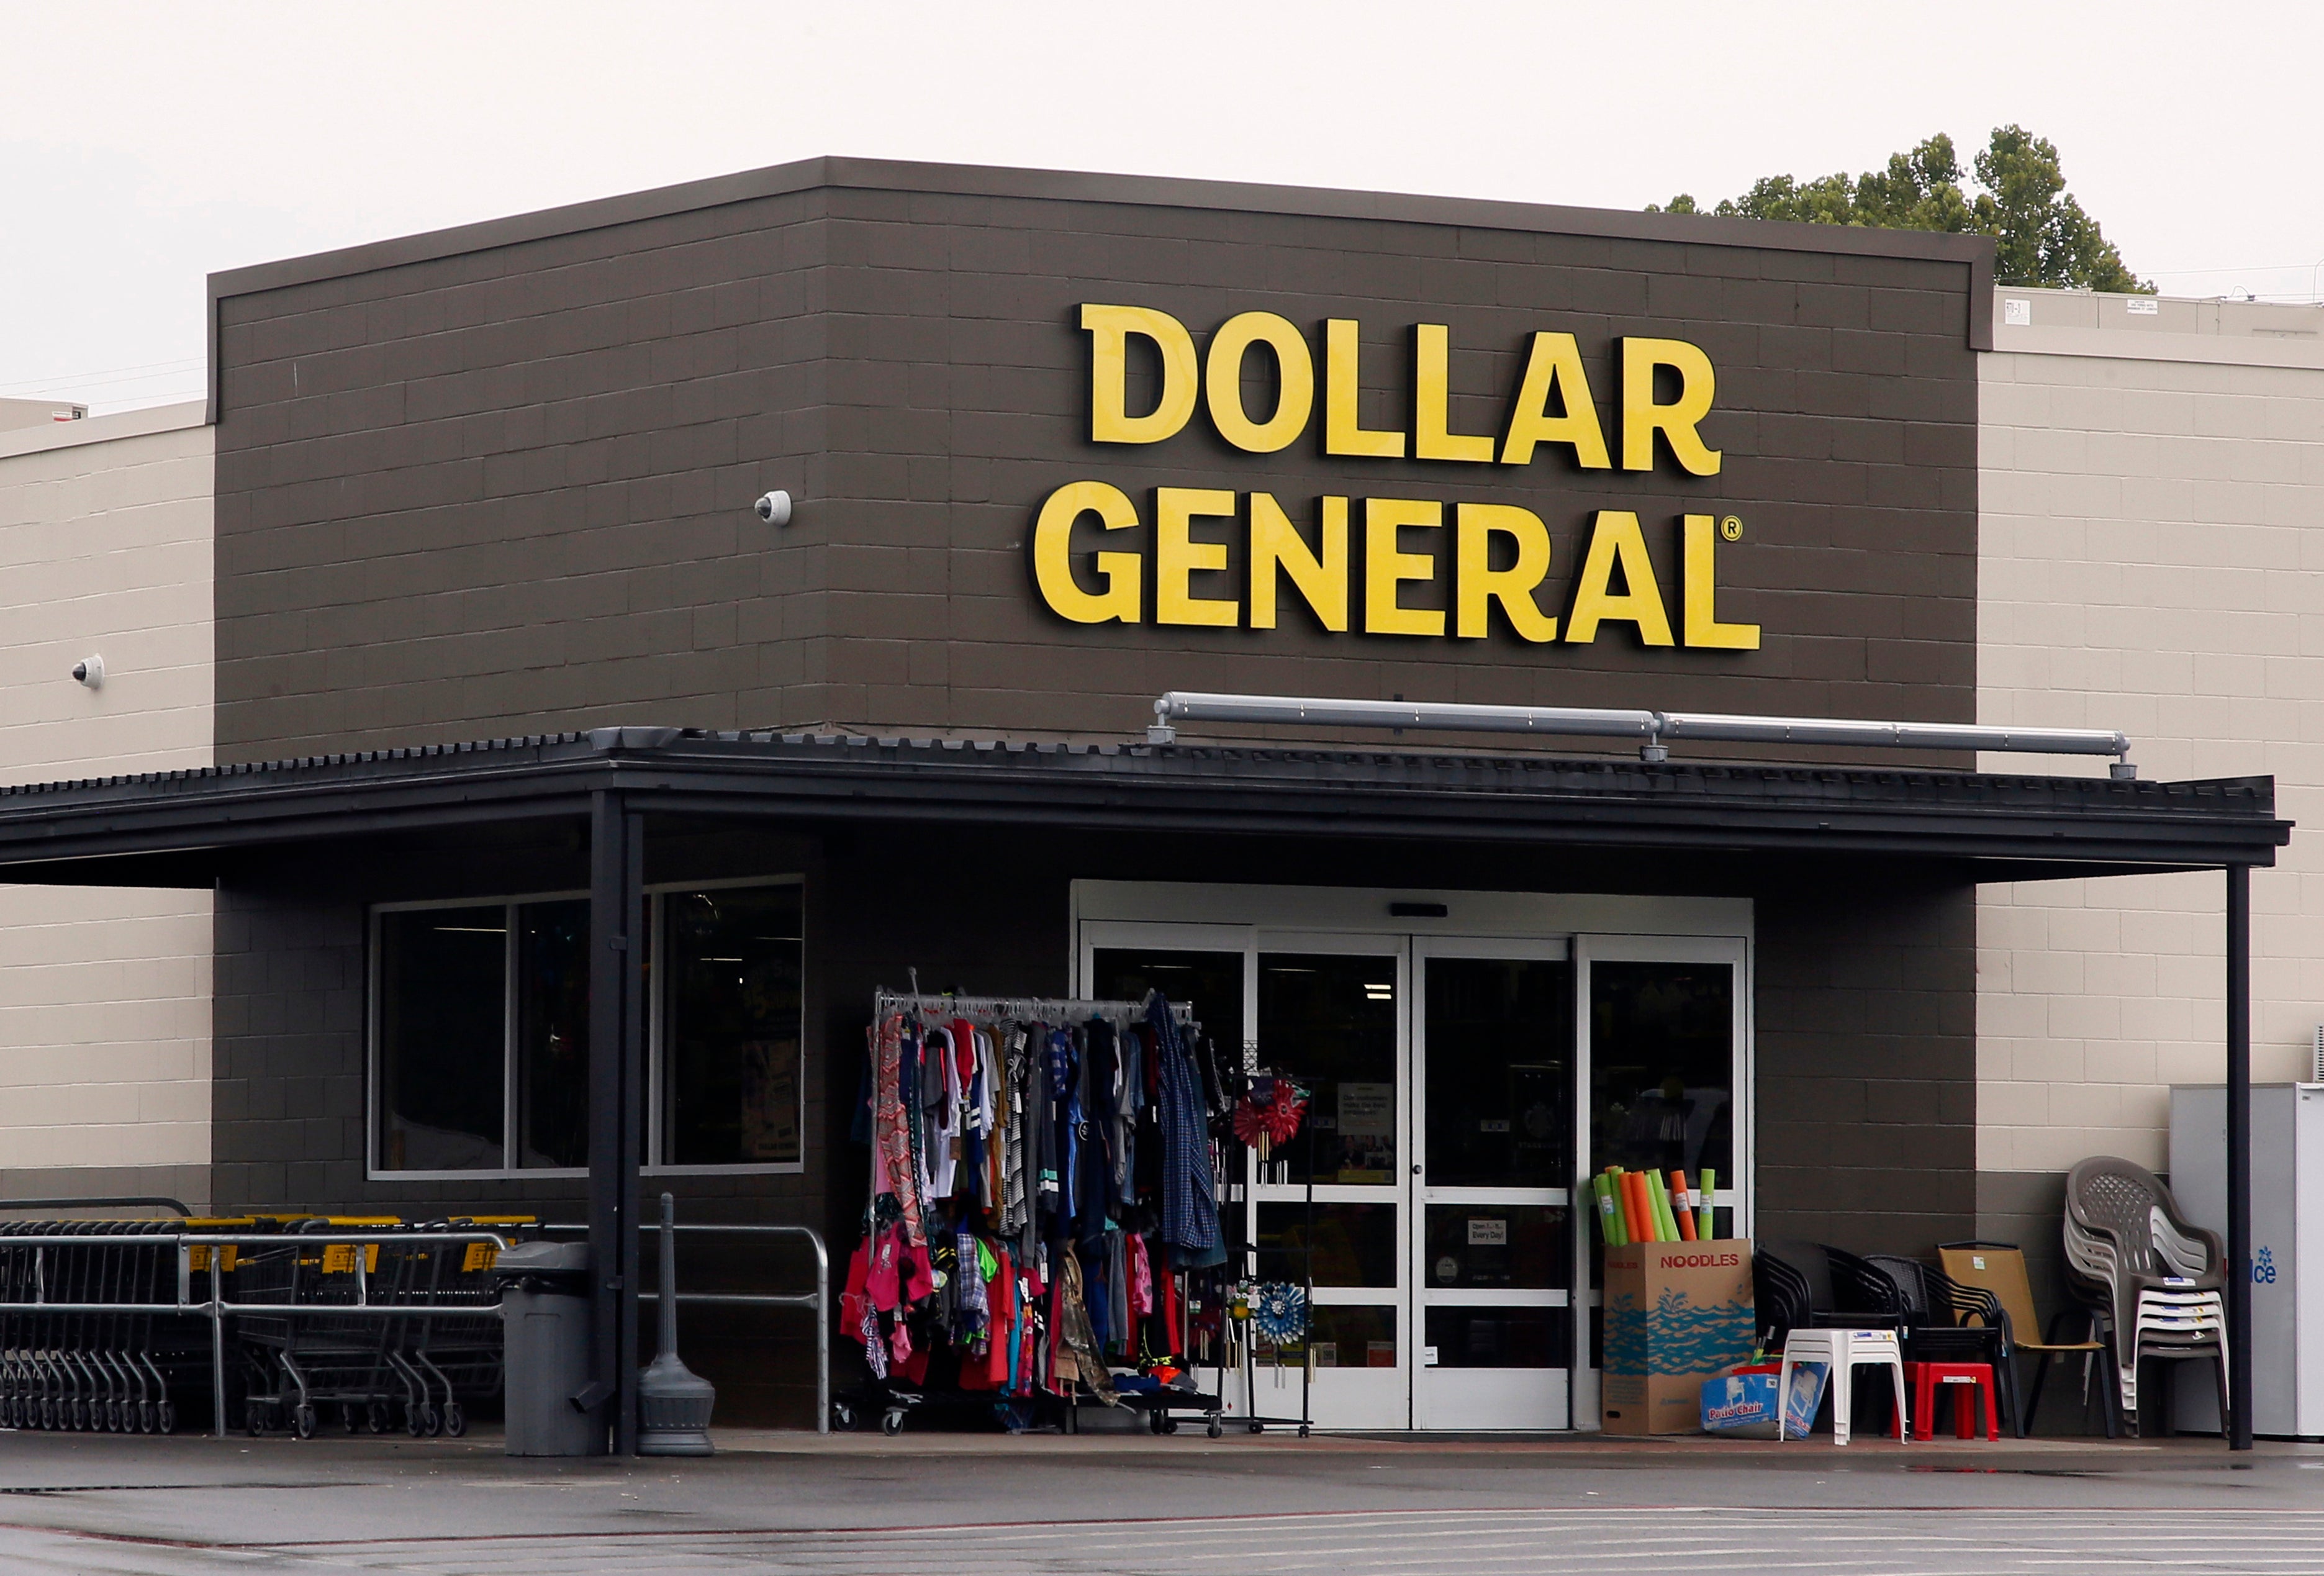 A Dollar General store is seen, Aug. 3, 2017, in Luther, Oklahoma. Dollar General has agreed to pay a $12 million fine and to improve conditions at its thousands of retail stores nationwide to make them safer for workers